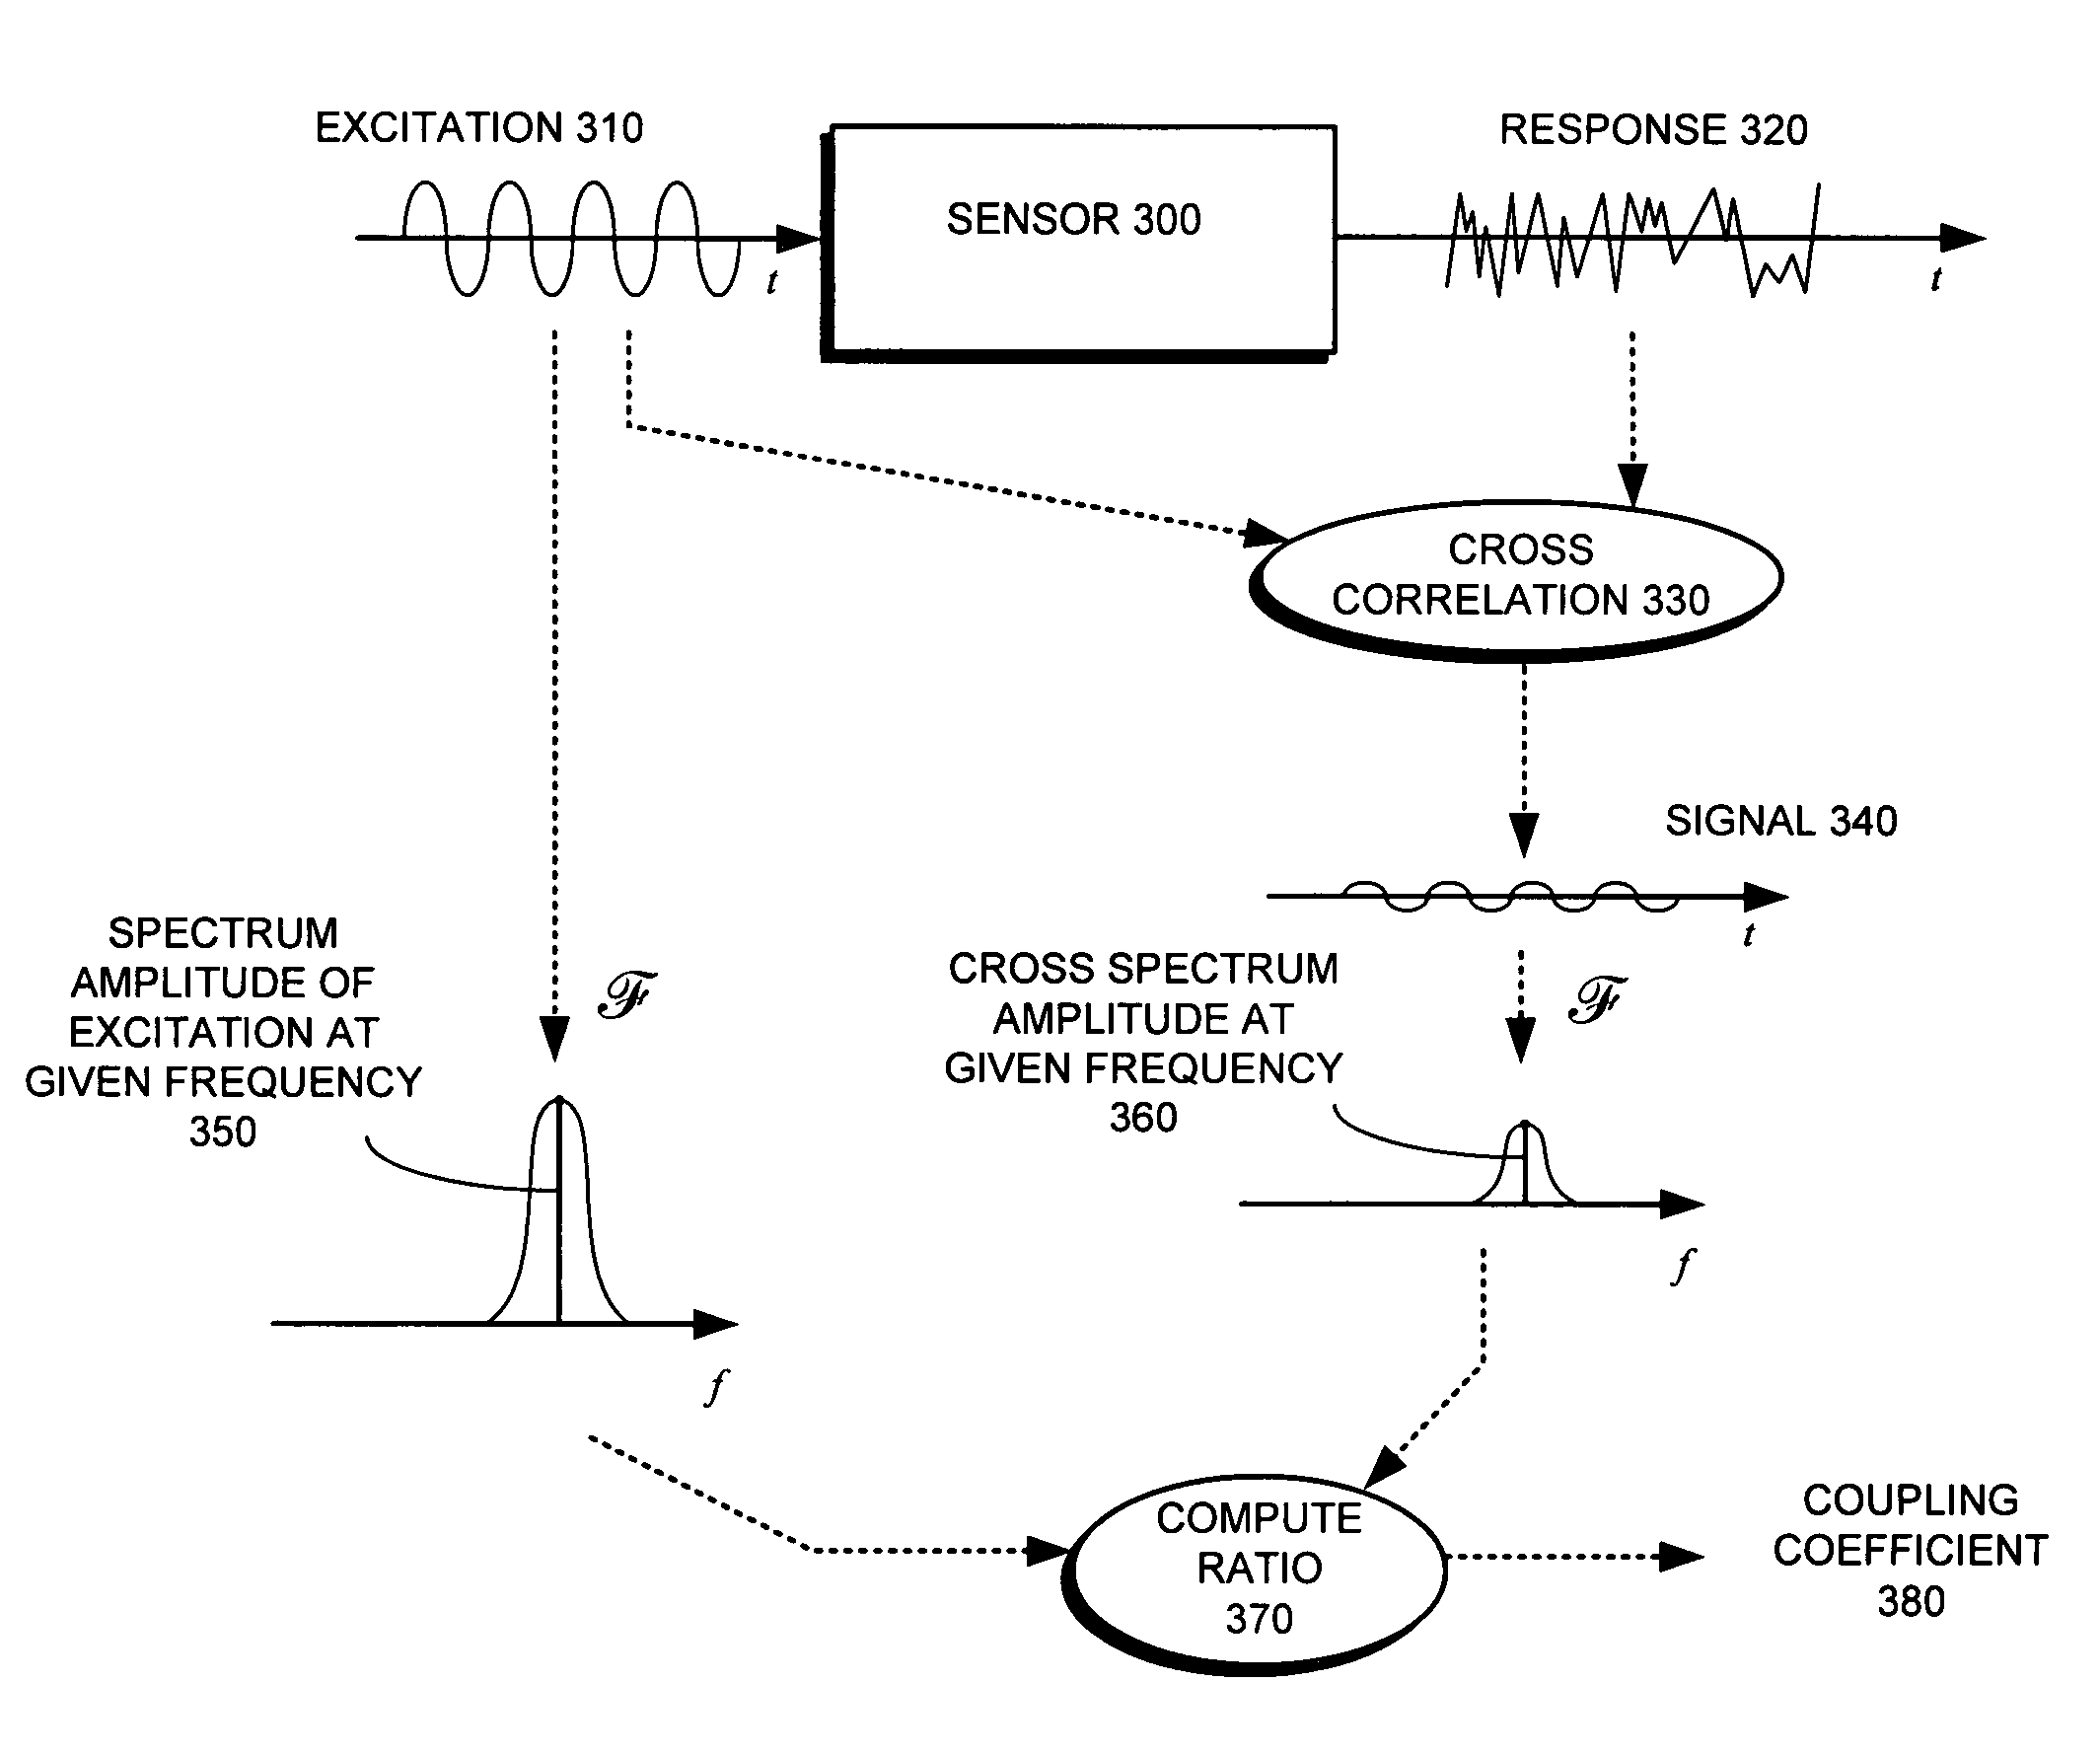 Method and apparatus for validating sensor operability in a computer system